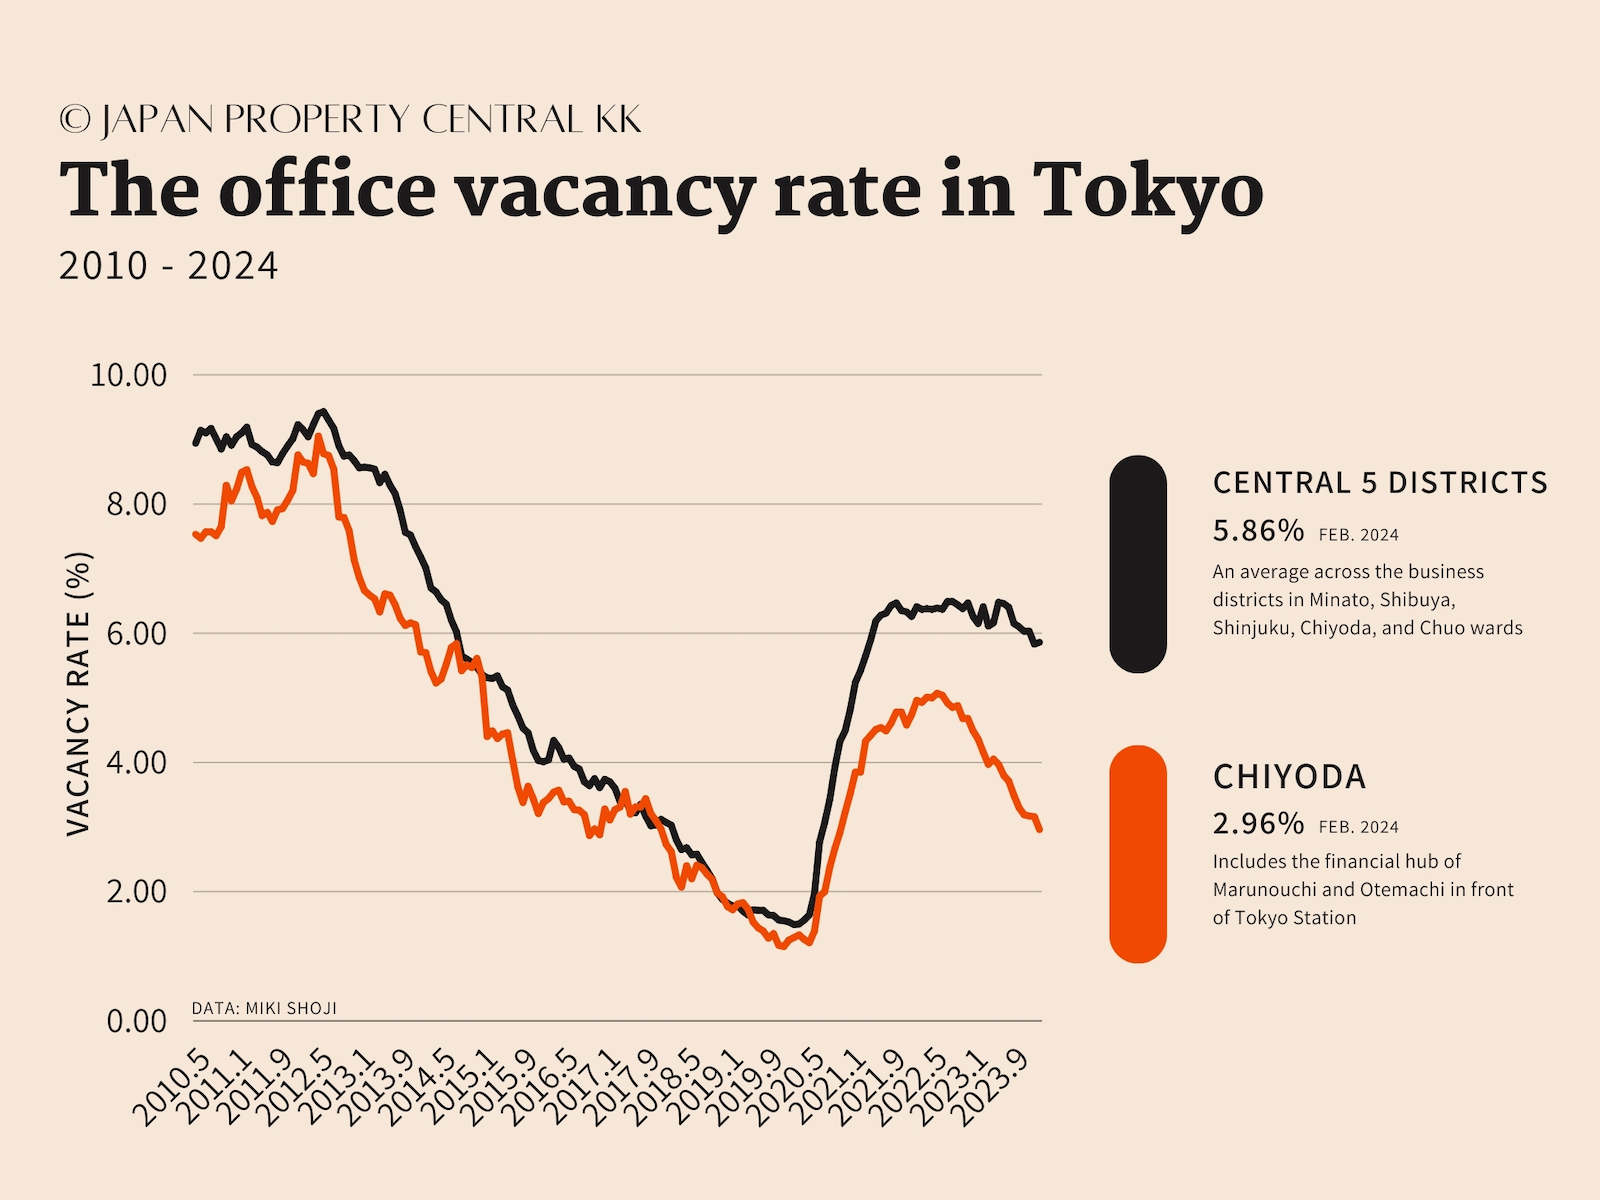 Chiyoda office vacancy rate reaches 39-month low – JAPAN PROPERTY CENTRAL K.K.